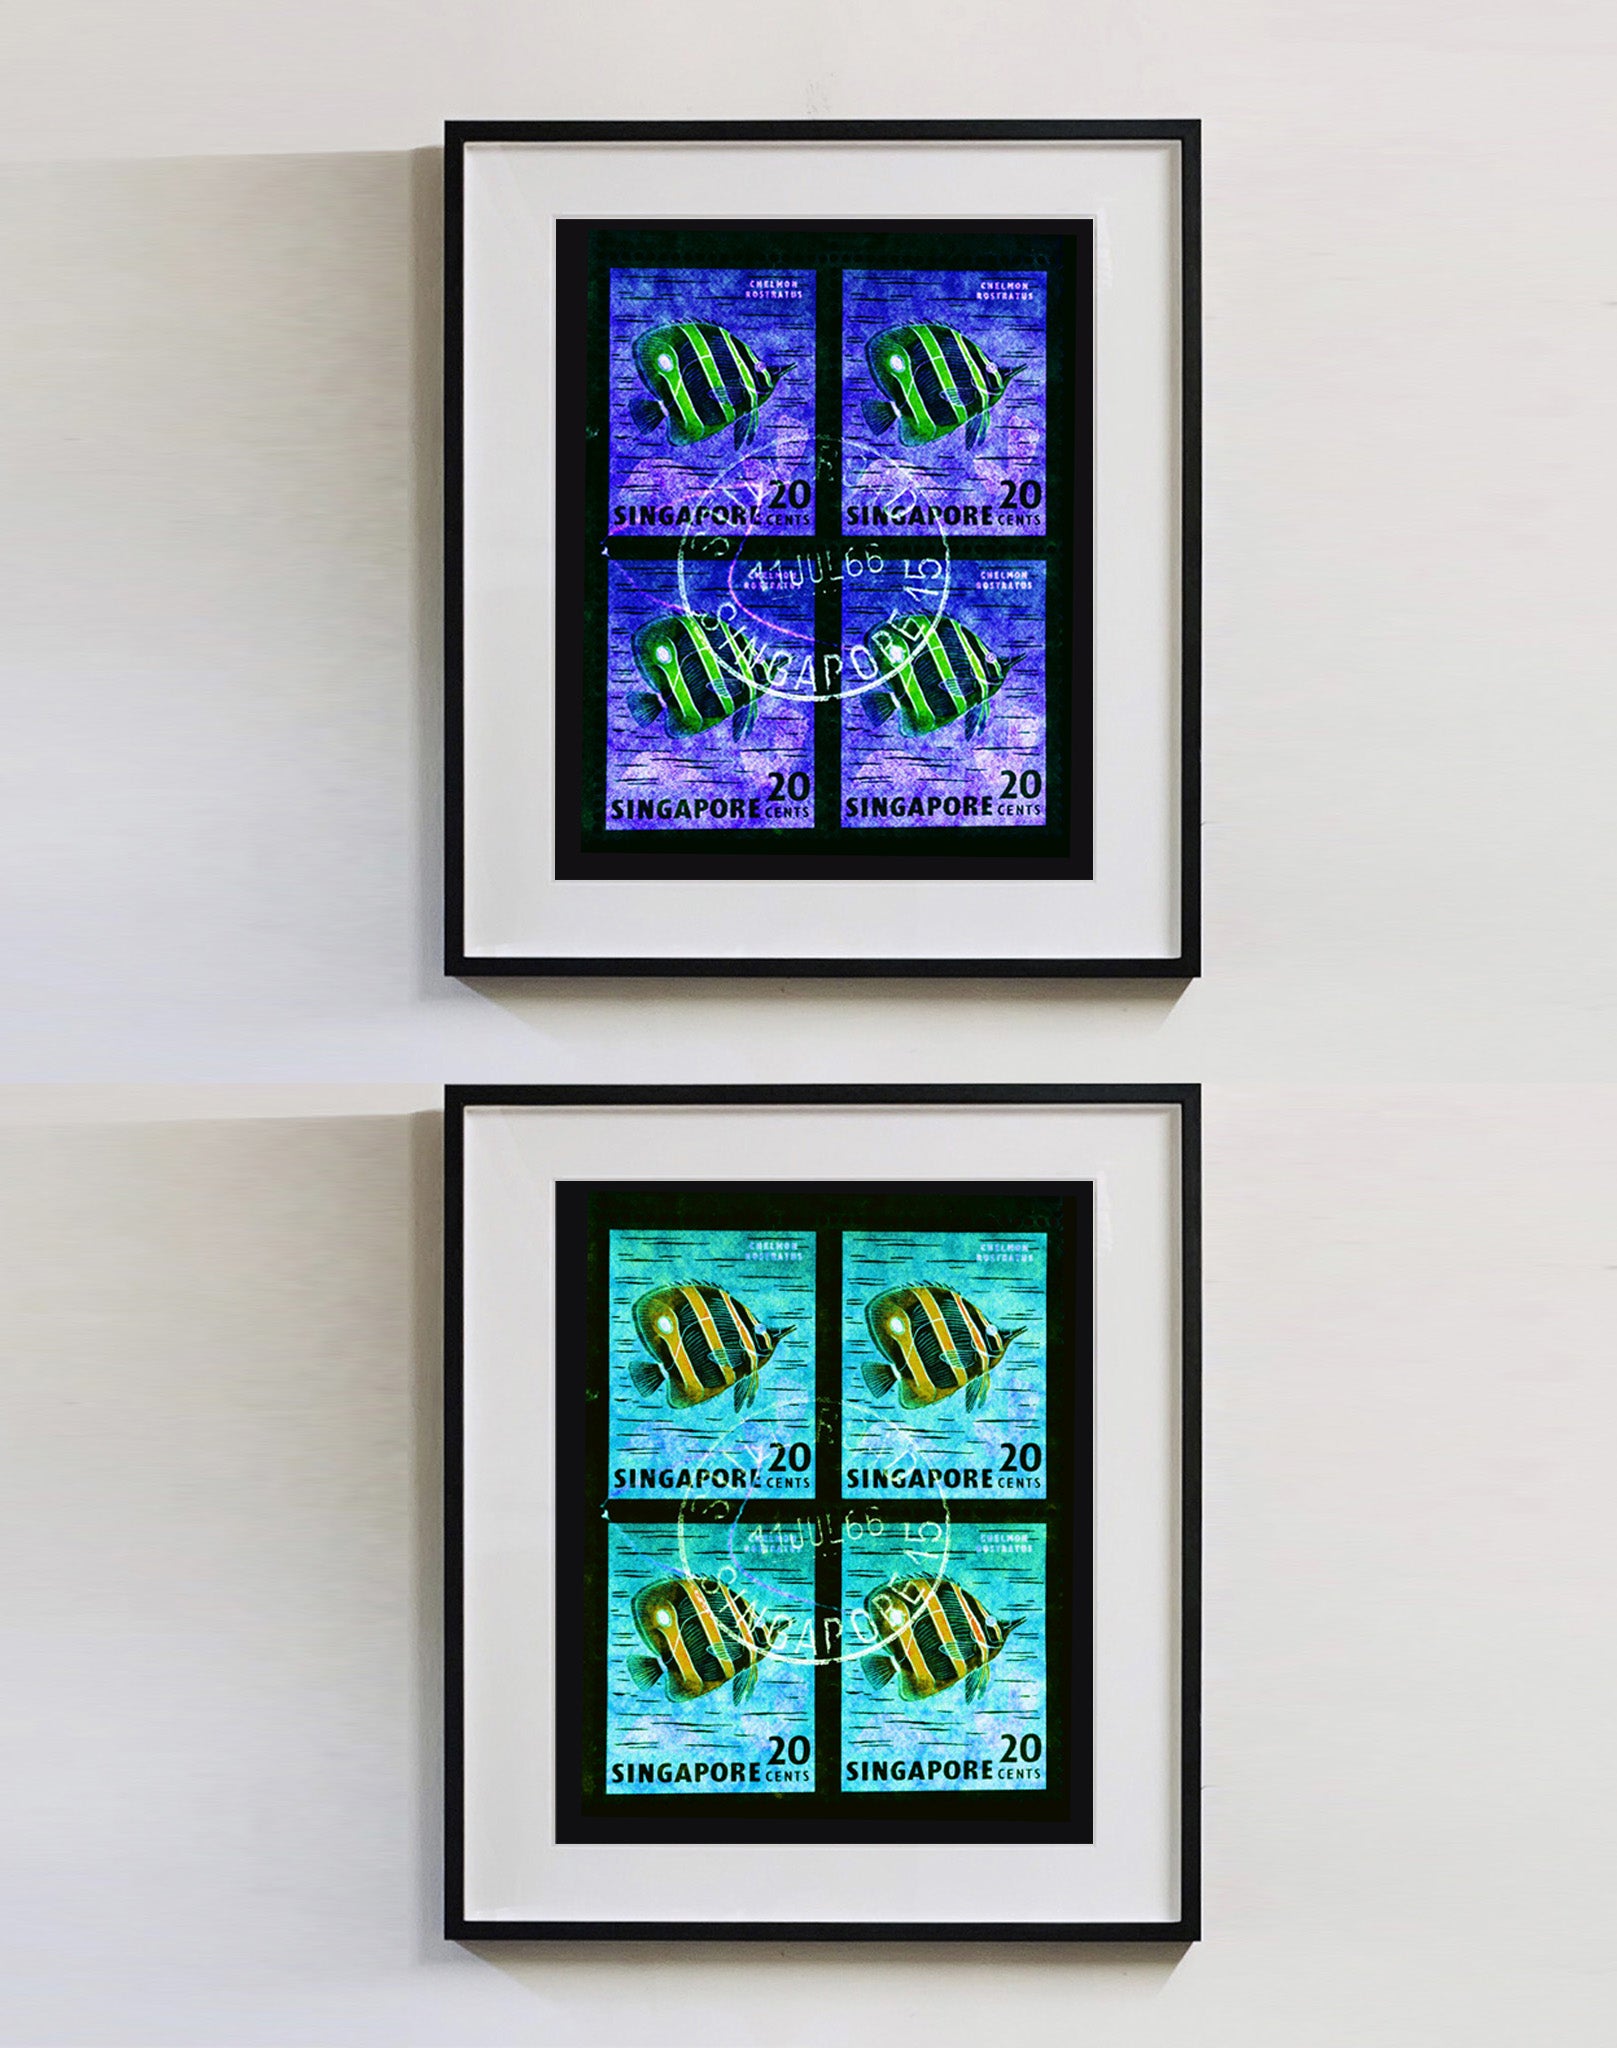 20 Cents Singapore Butterfly Fish (Gold). These historic postage stamps that make up the Heidler & Heeps Stamp Collection, Singapore Series “Postcards from Afar” have been given a twenty-first century pop art lease of life. The fine detailed tapestry of the original small postage stamp has been brought to life, made unique by the franking stamp and Heidler & Heeps specialist darkroom process.